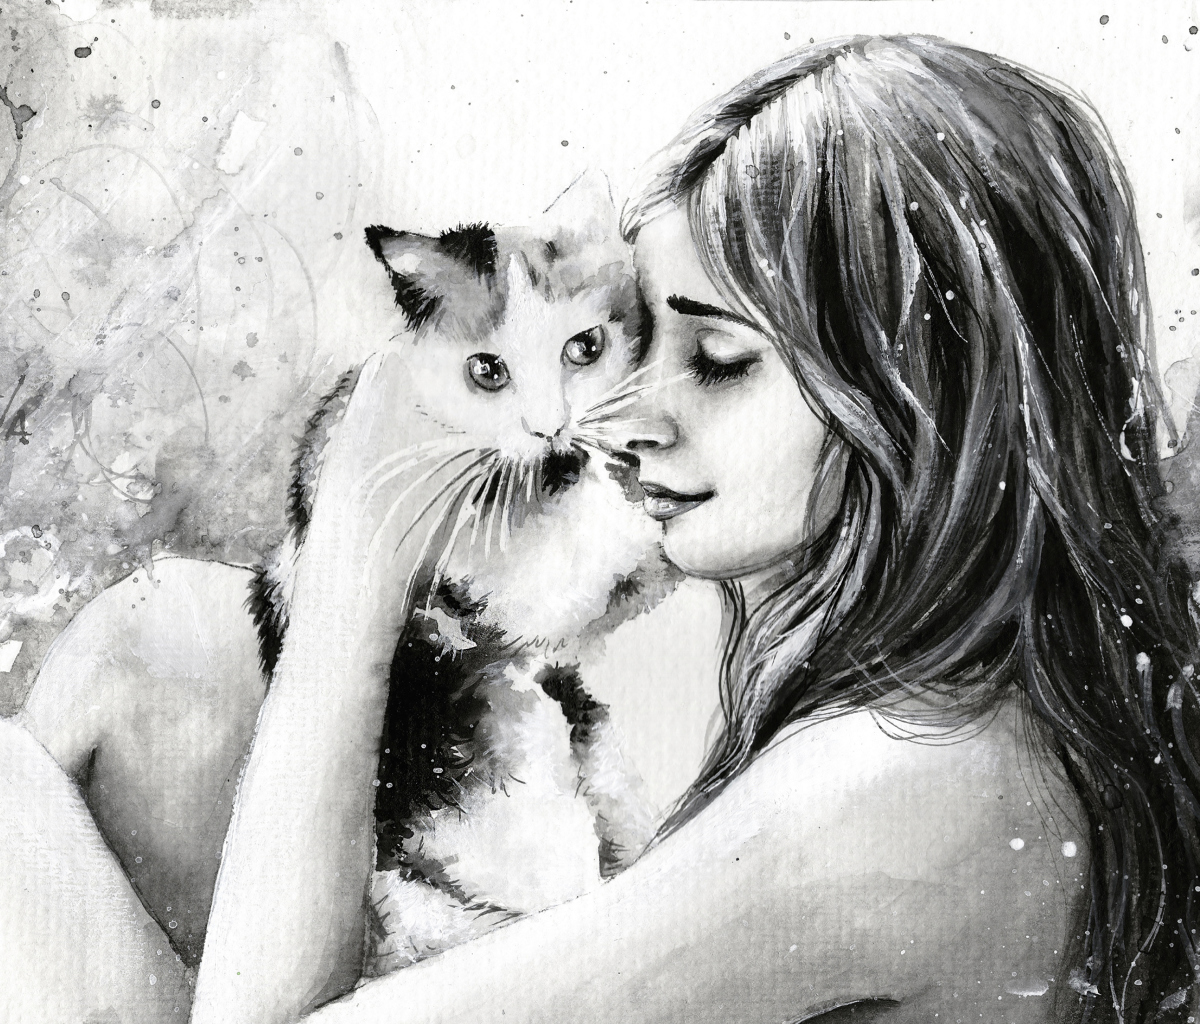 Das Girl With Cat Black And White Painting Wallpaper 1200x1024